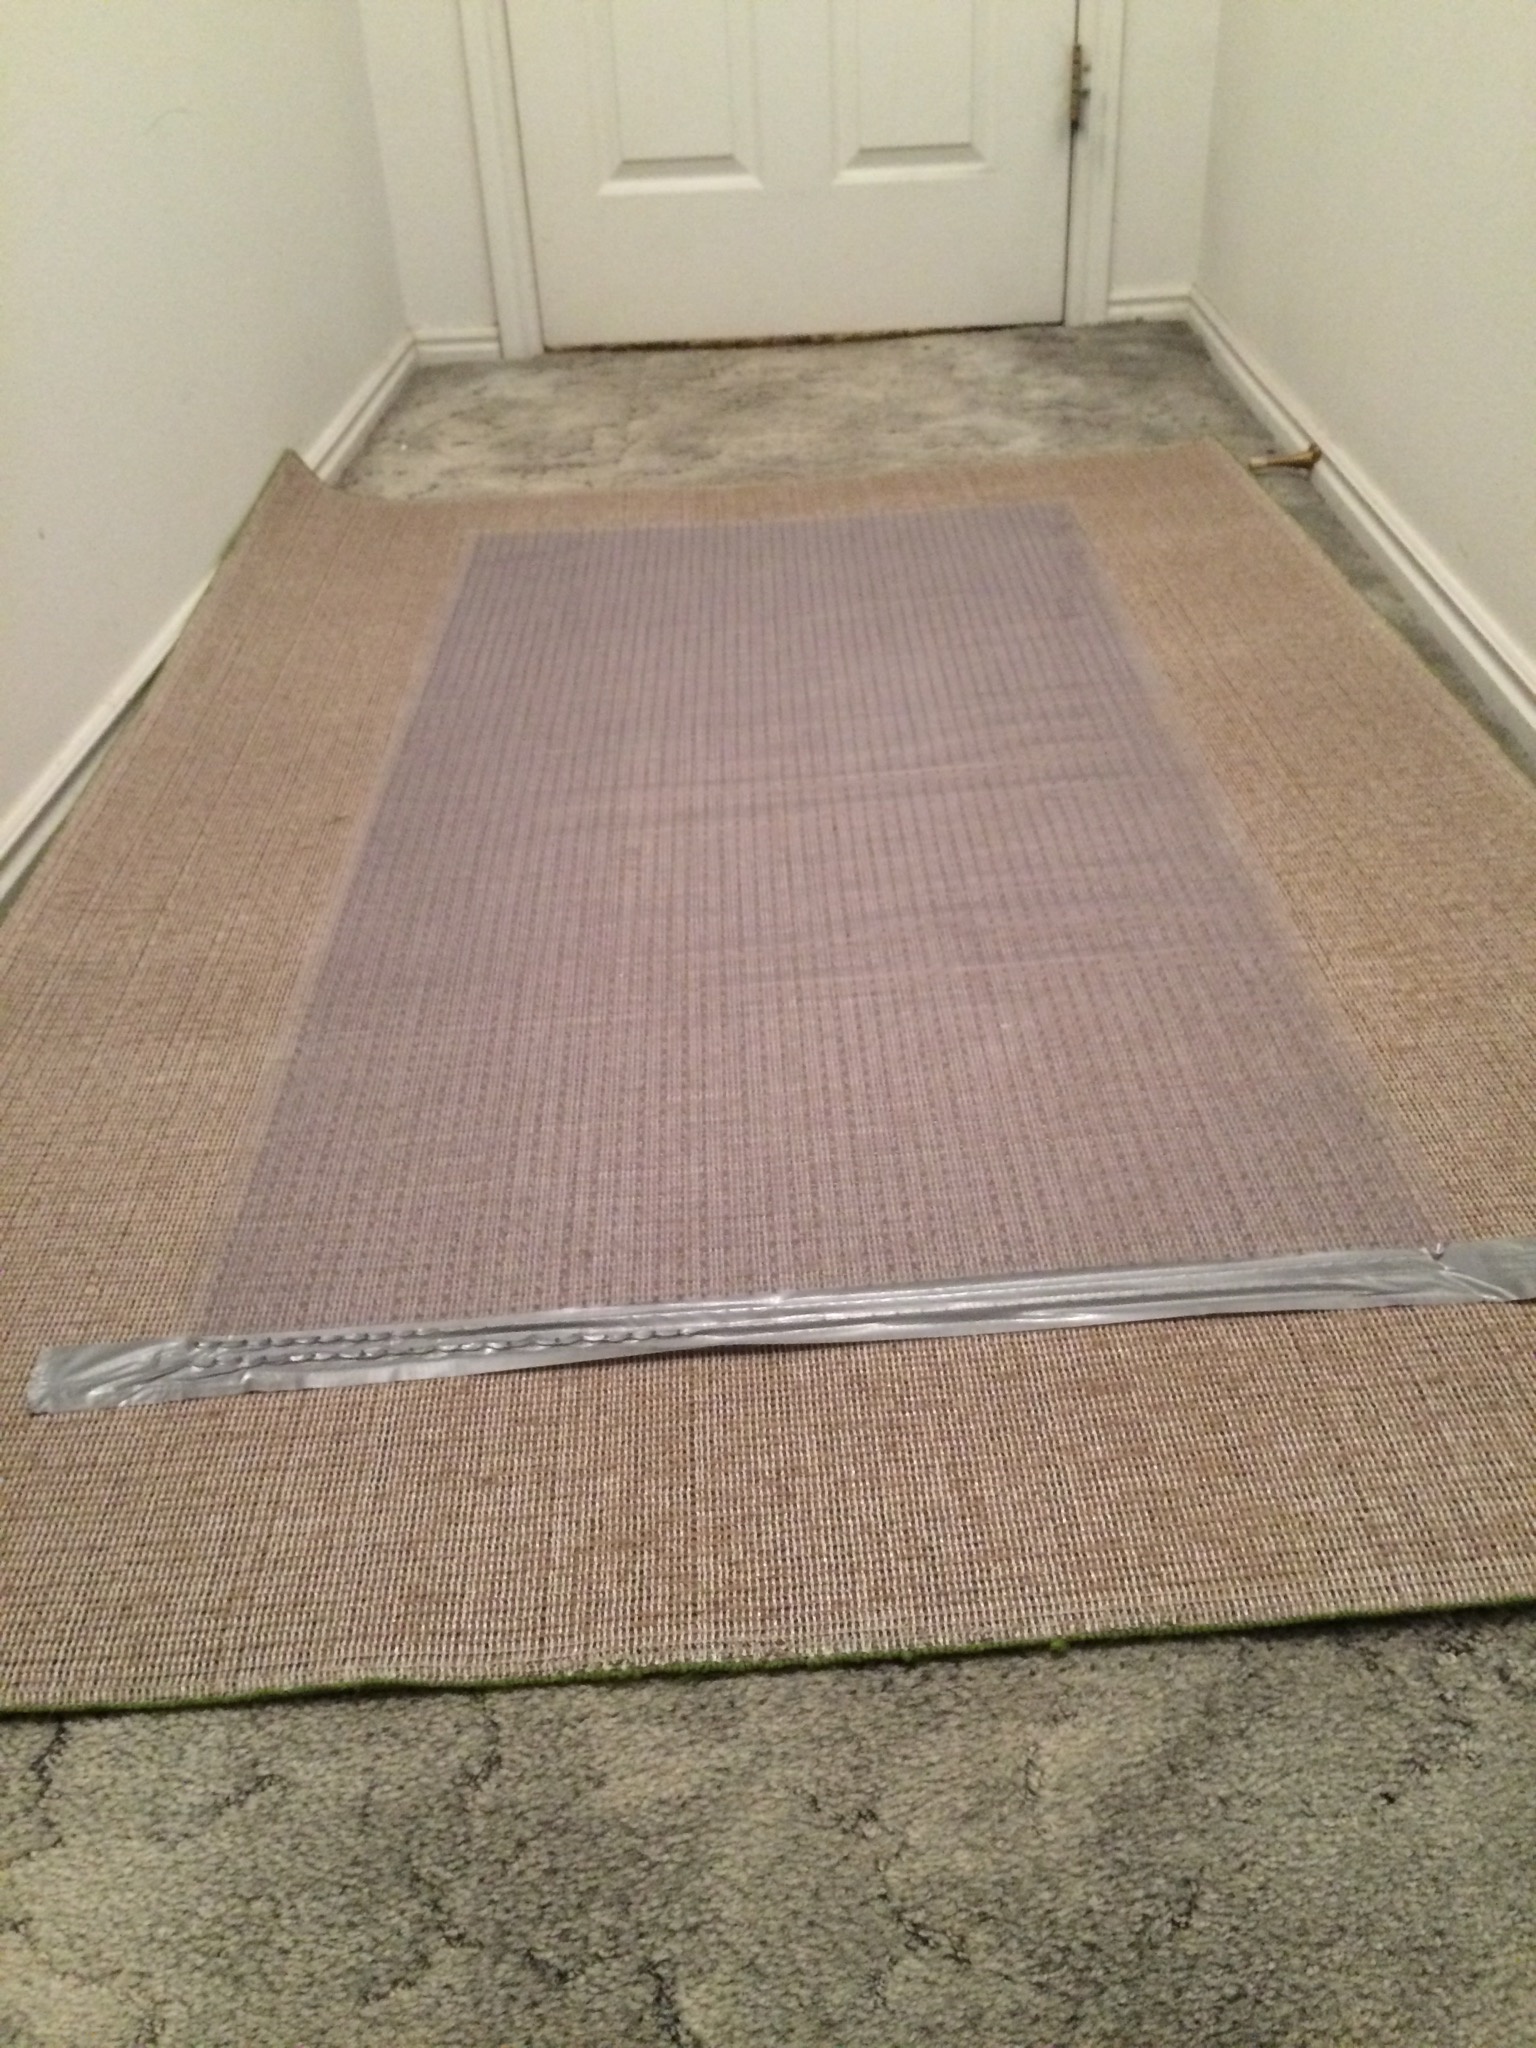 How To Secure An Area Rug Over Carpet, How To Keep Area Rug On Carpet From Moving